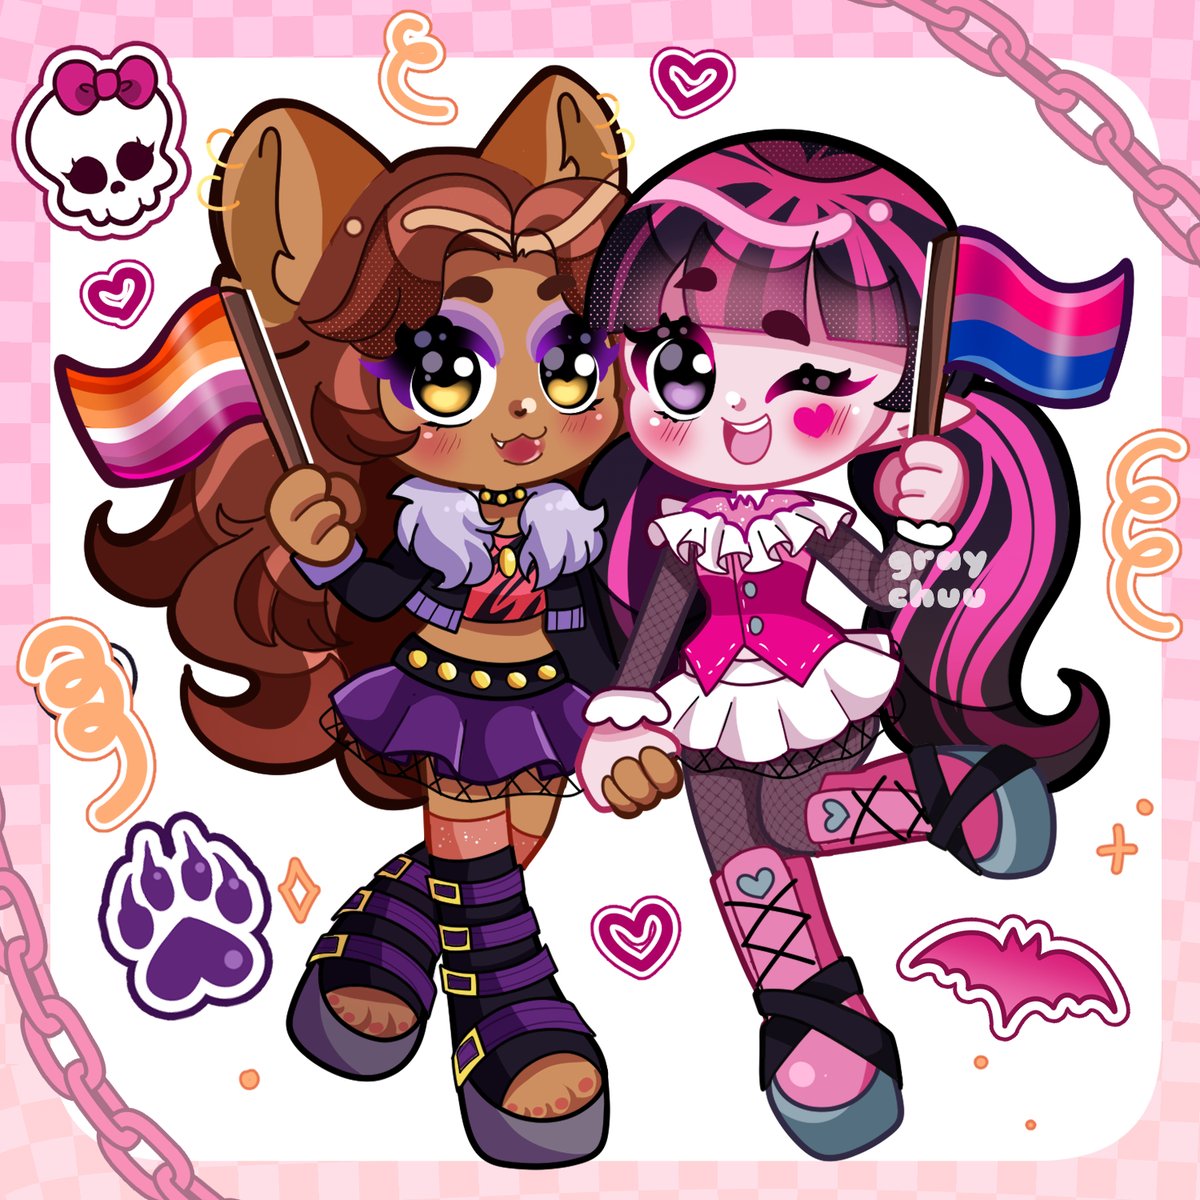 🌈Happy pride! Anyone else grow up with these two?🌈 
*
#MonsterHigh #PrideMonth 
*
🦇Rts appreciated!🦇